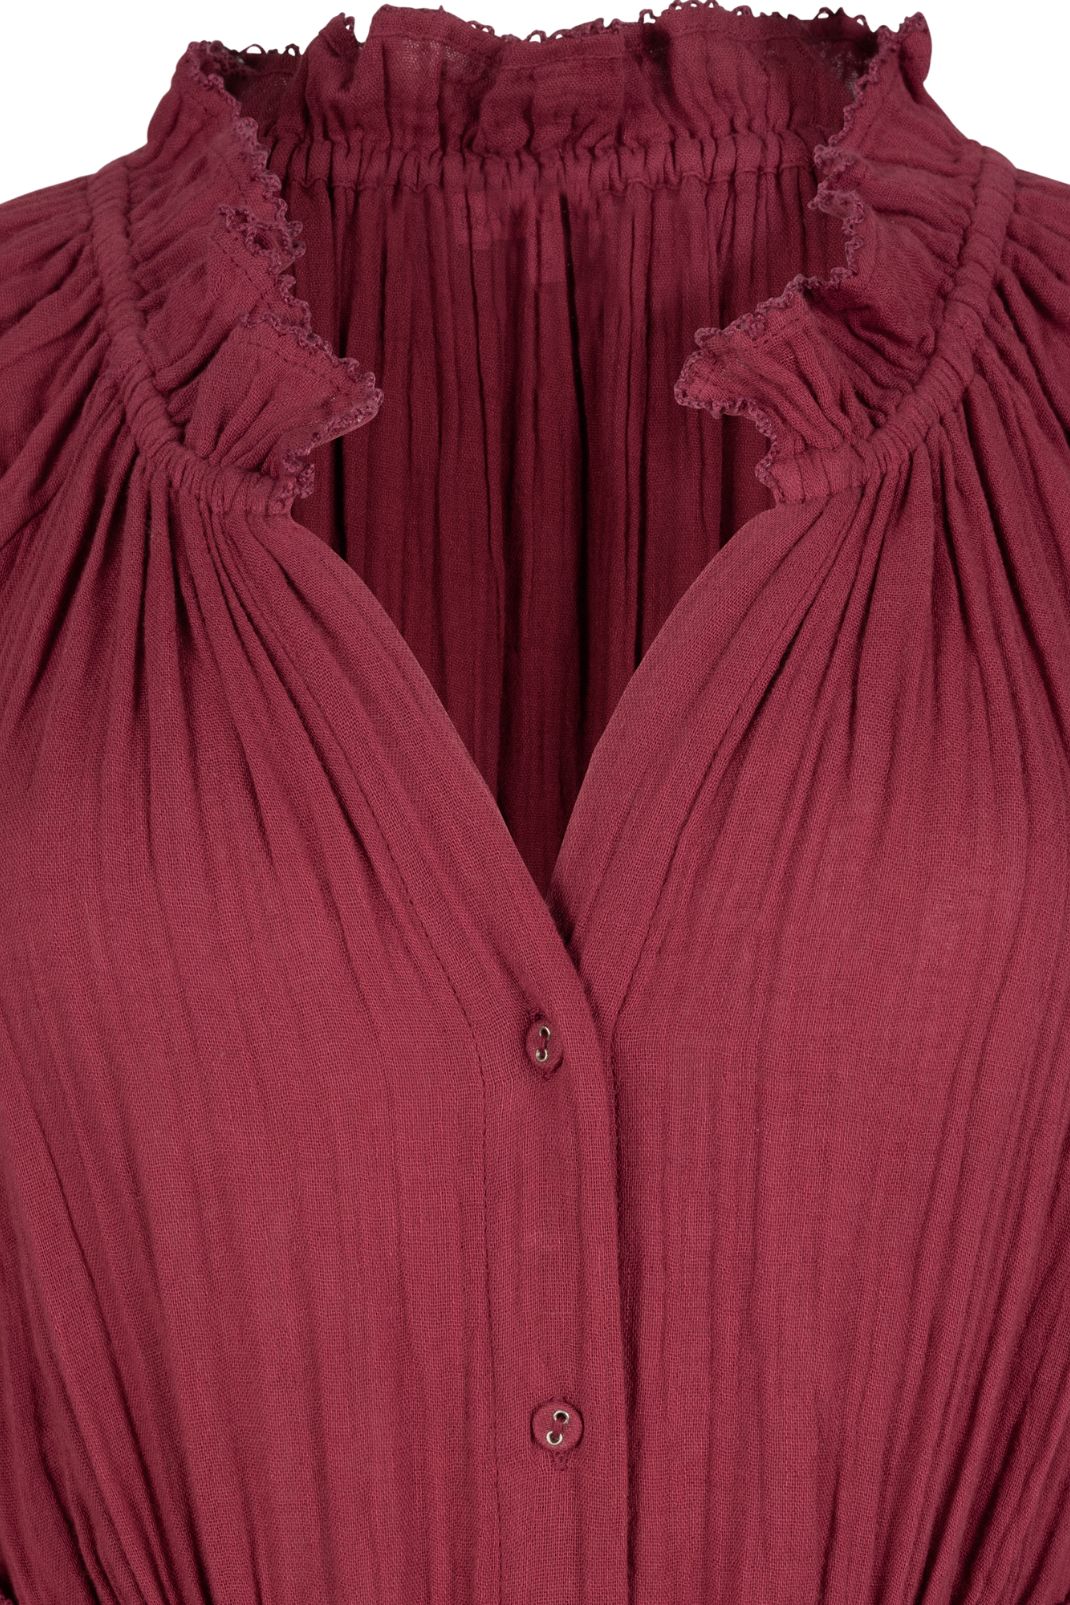 Close up product shot of the Vivianne Dress in Cranberry